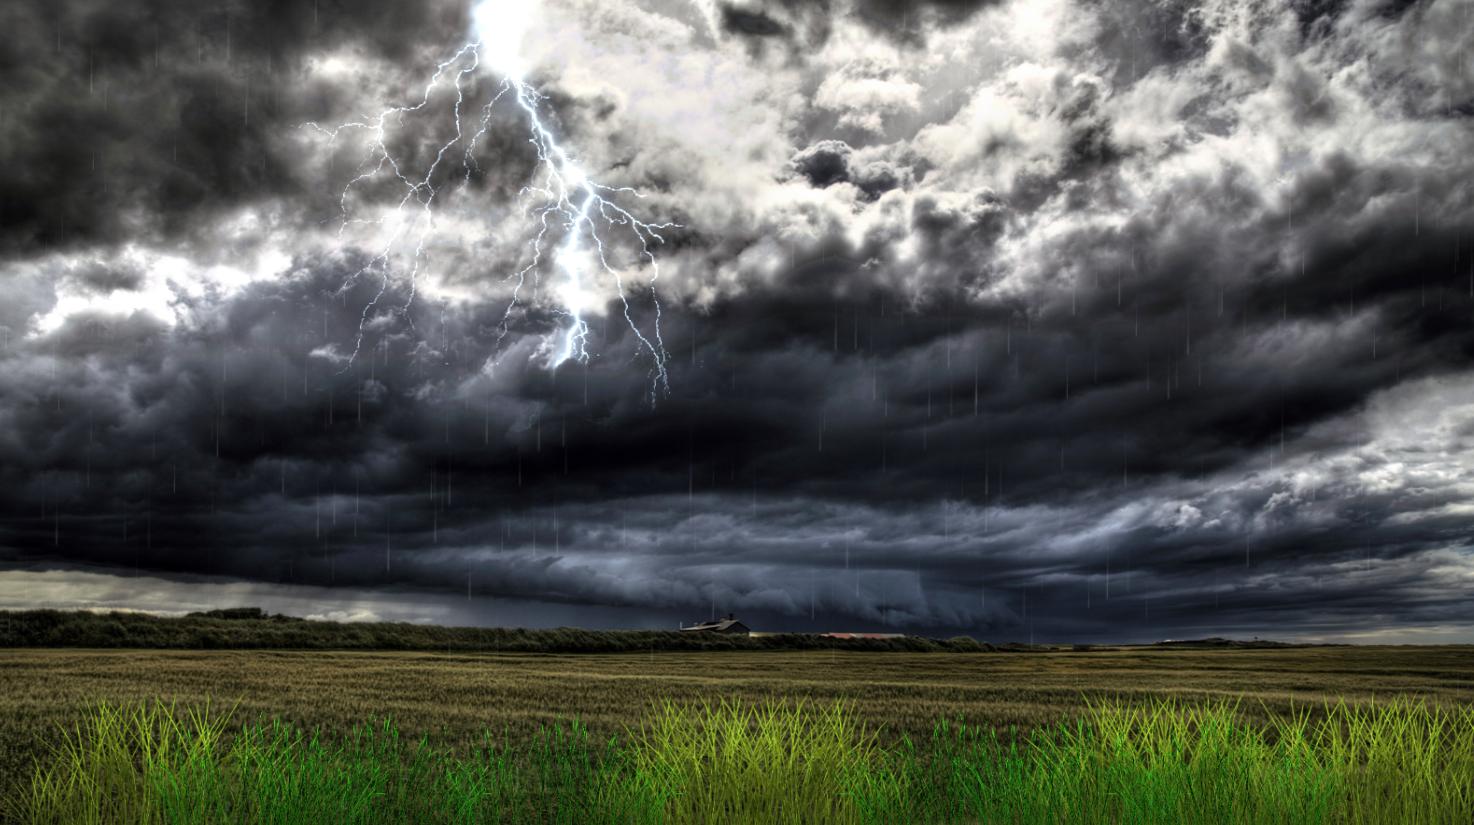 Now Thunderstorm Field Animated Wallpaper